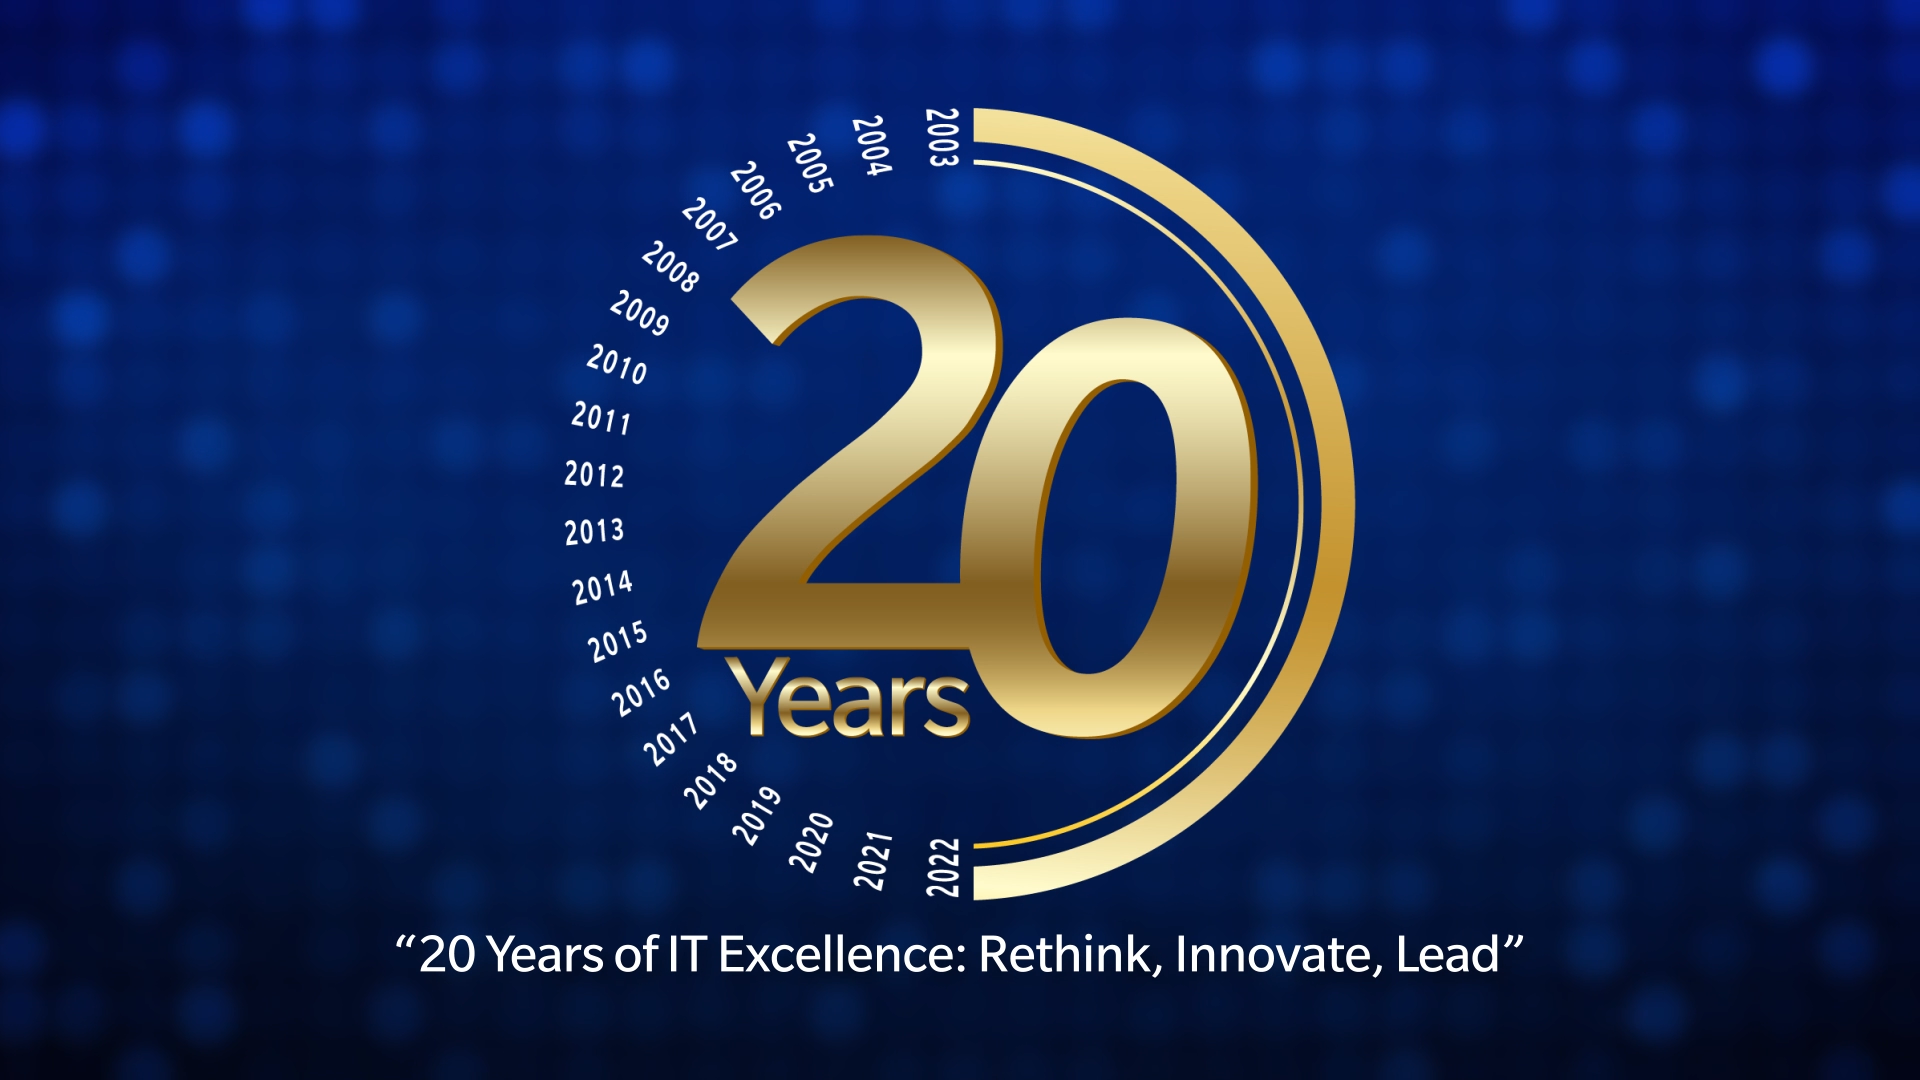 20 Years of IT Excellence